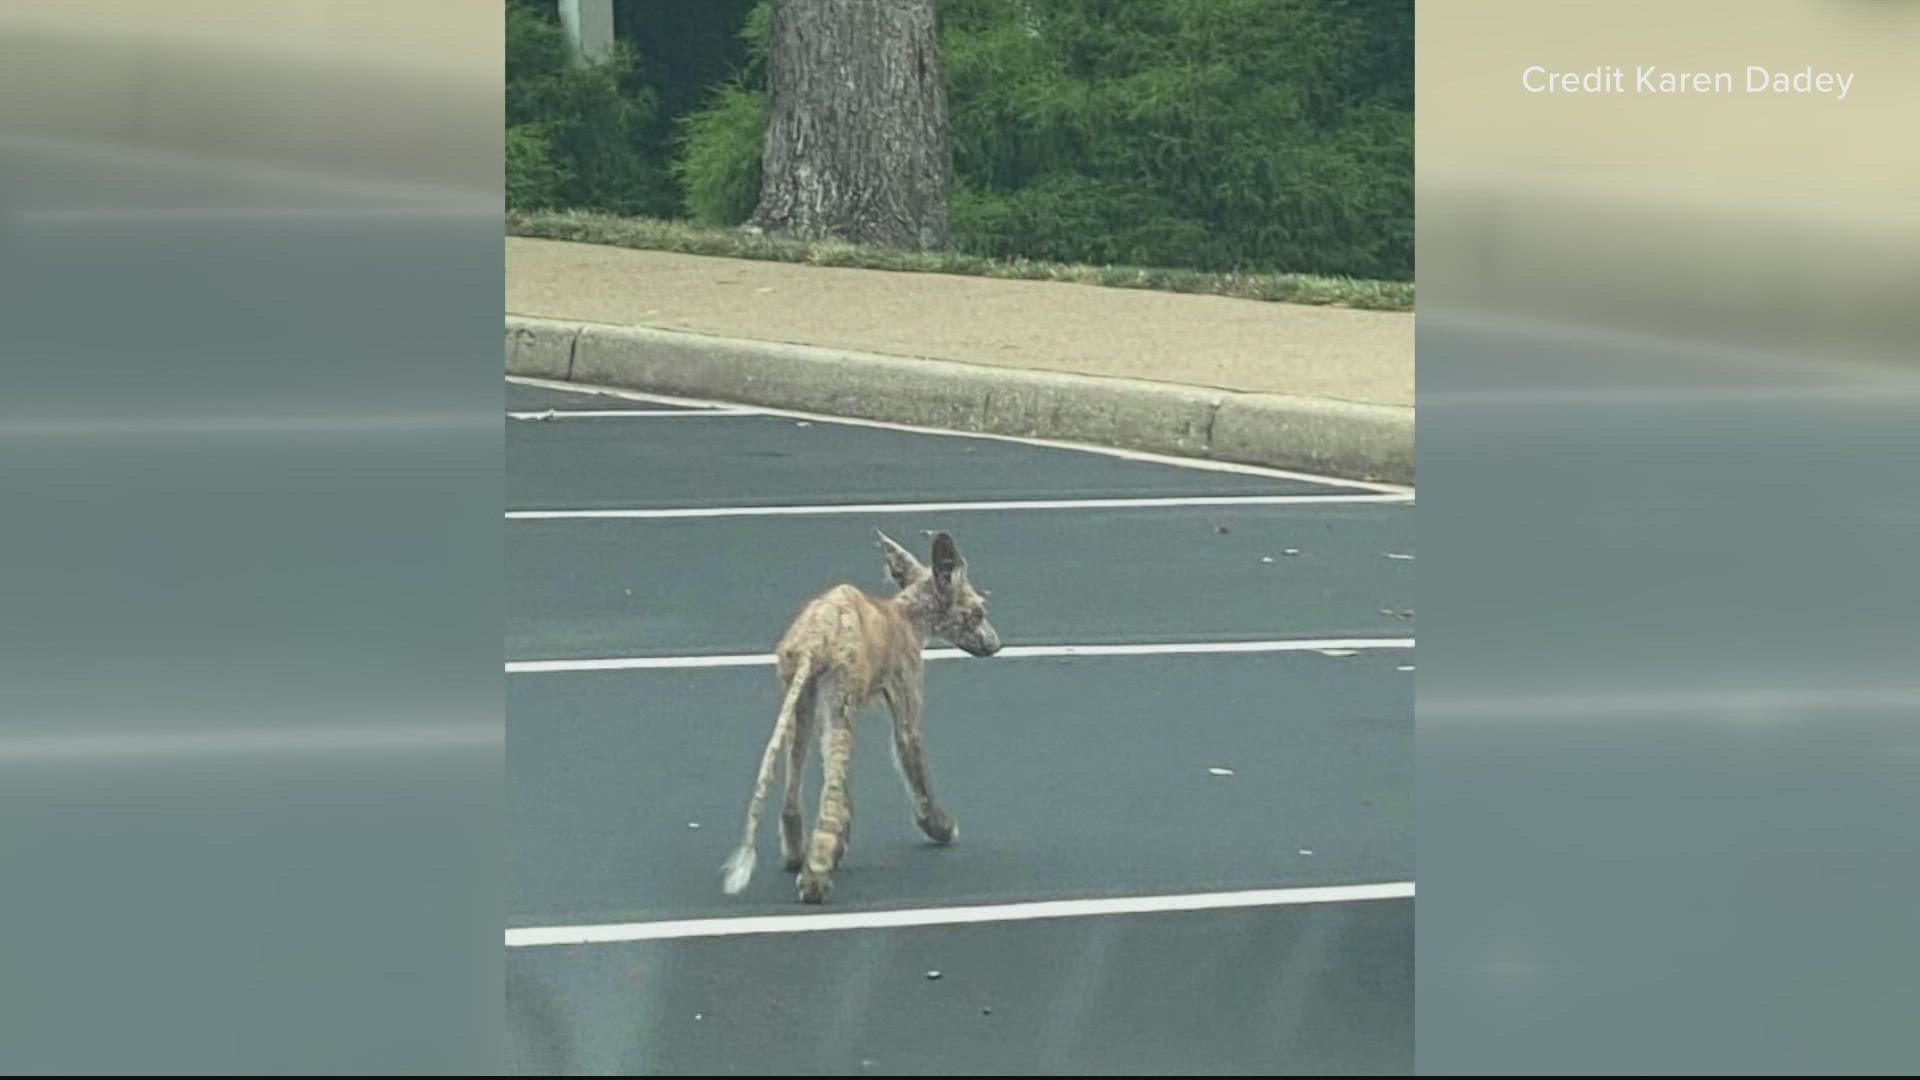 The Animal Welfare League of Arlington (AWLA)'s Animal Control Team and professional trappers are working together to capture a sly fox that has been described as ma